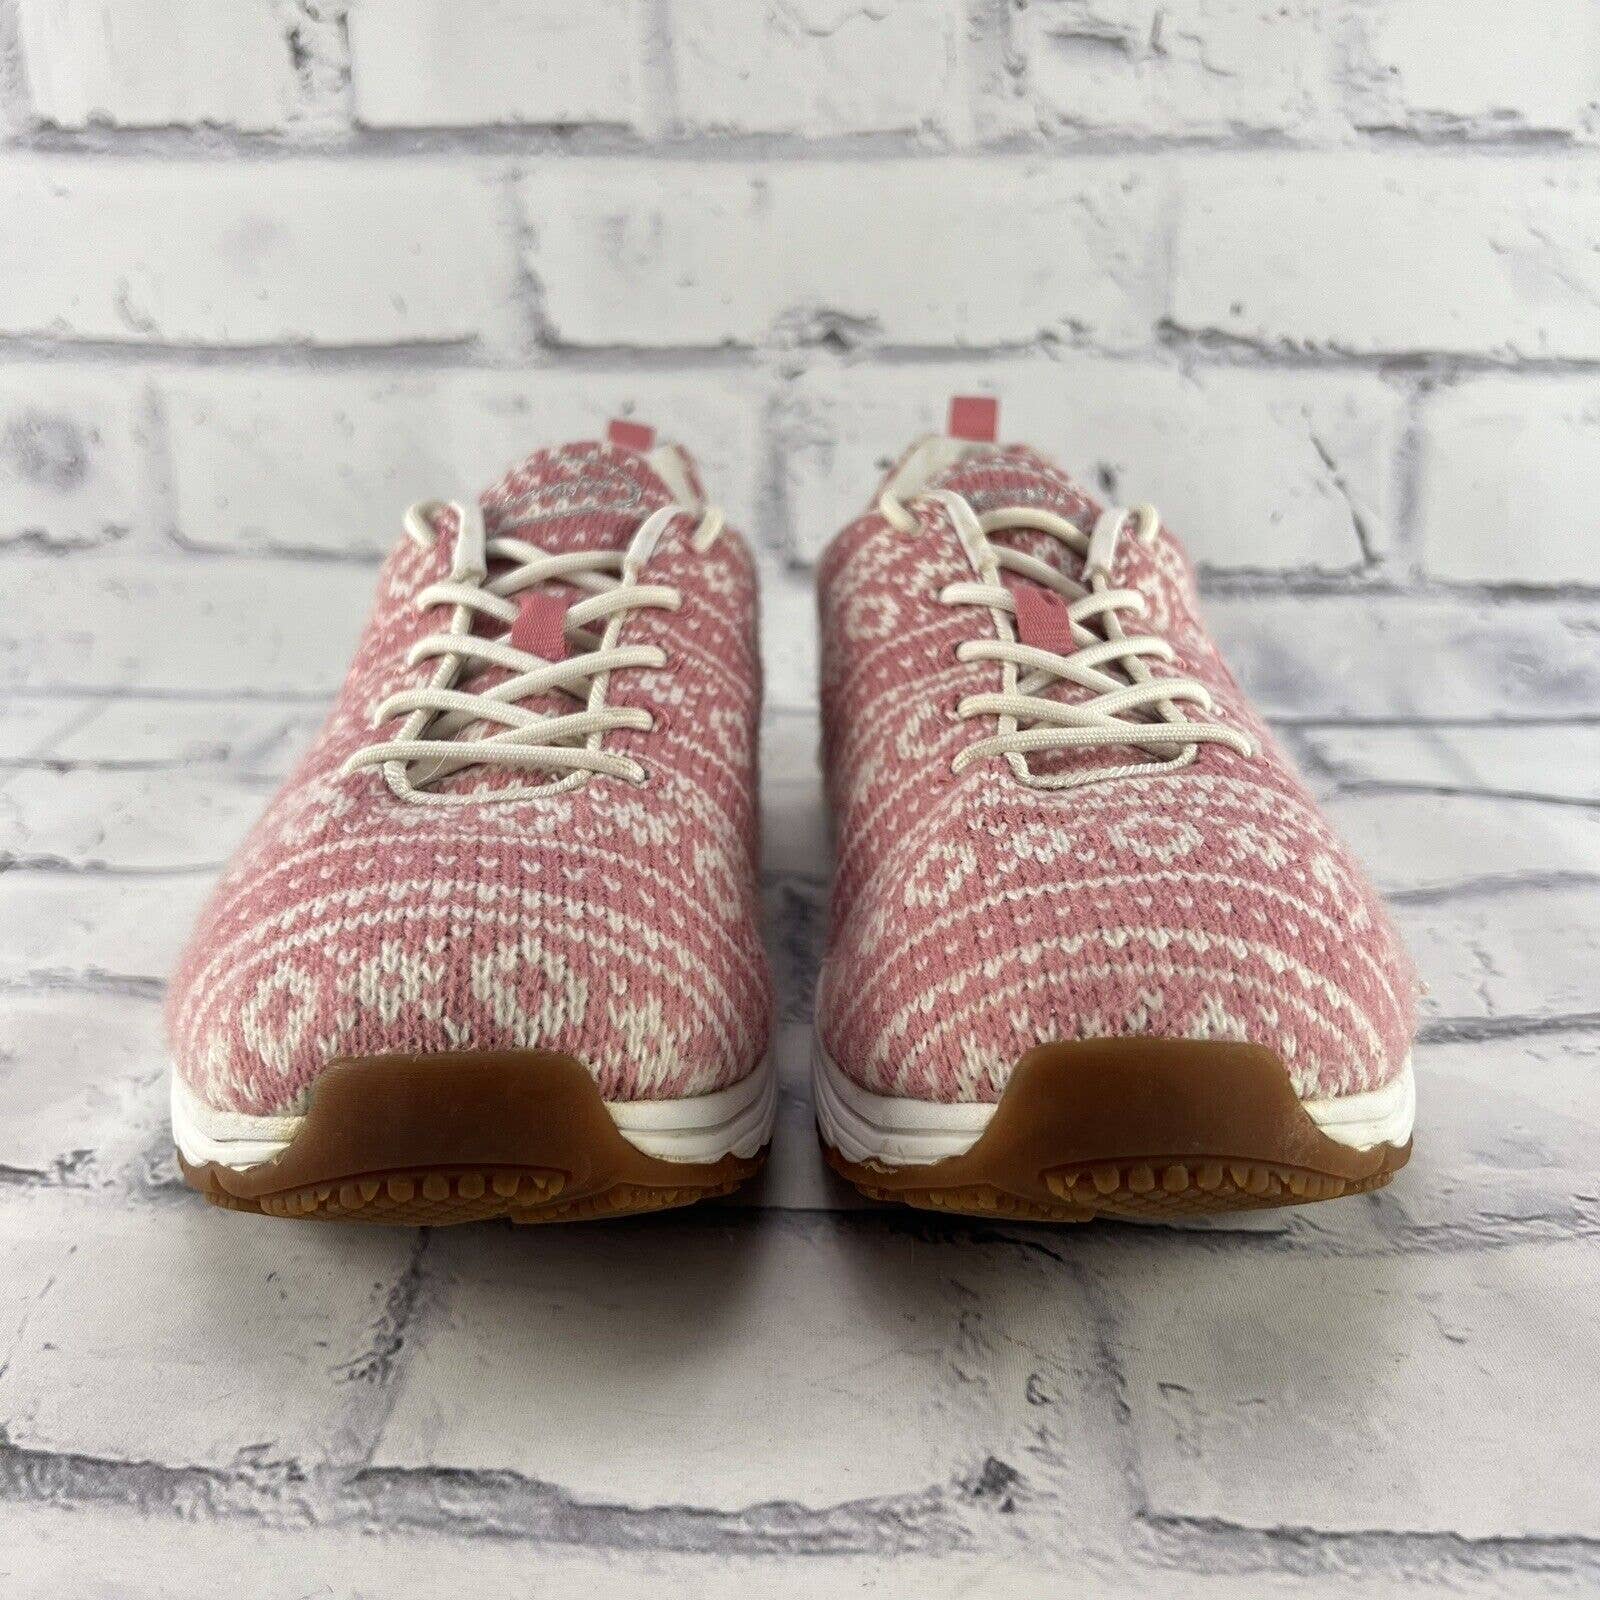 Therafit Paloma Wool Athletic Shoe Women’s Size 9 Lace Up Comfort Sneaker Pink